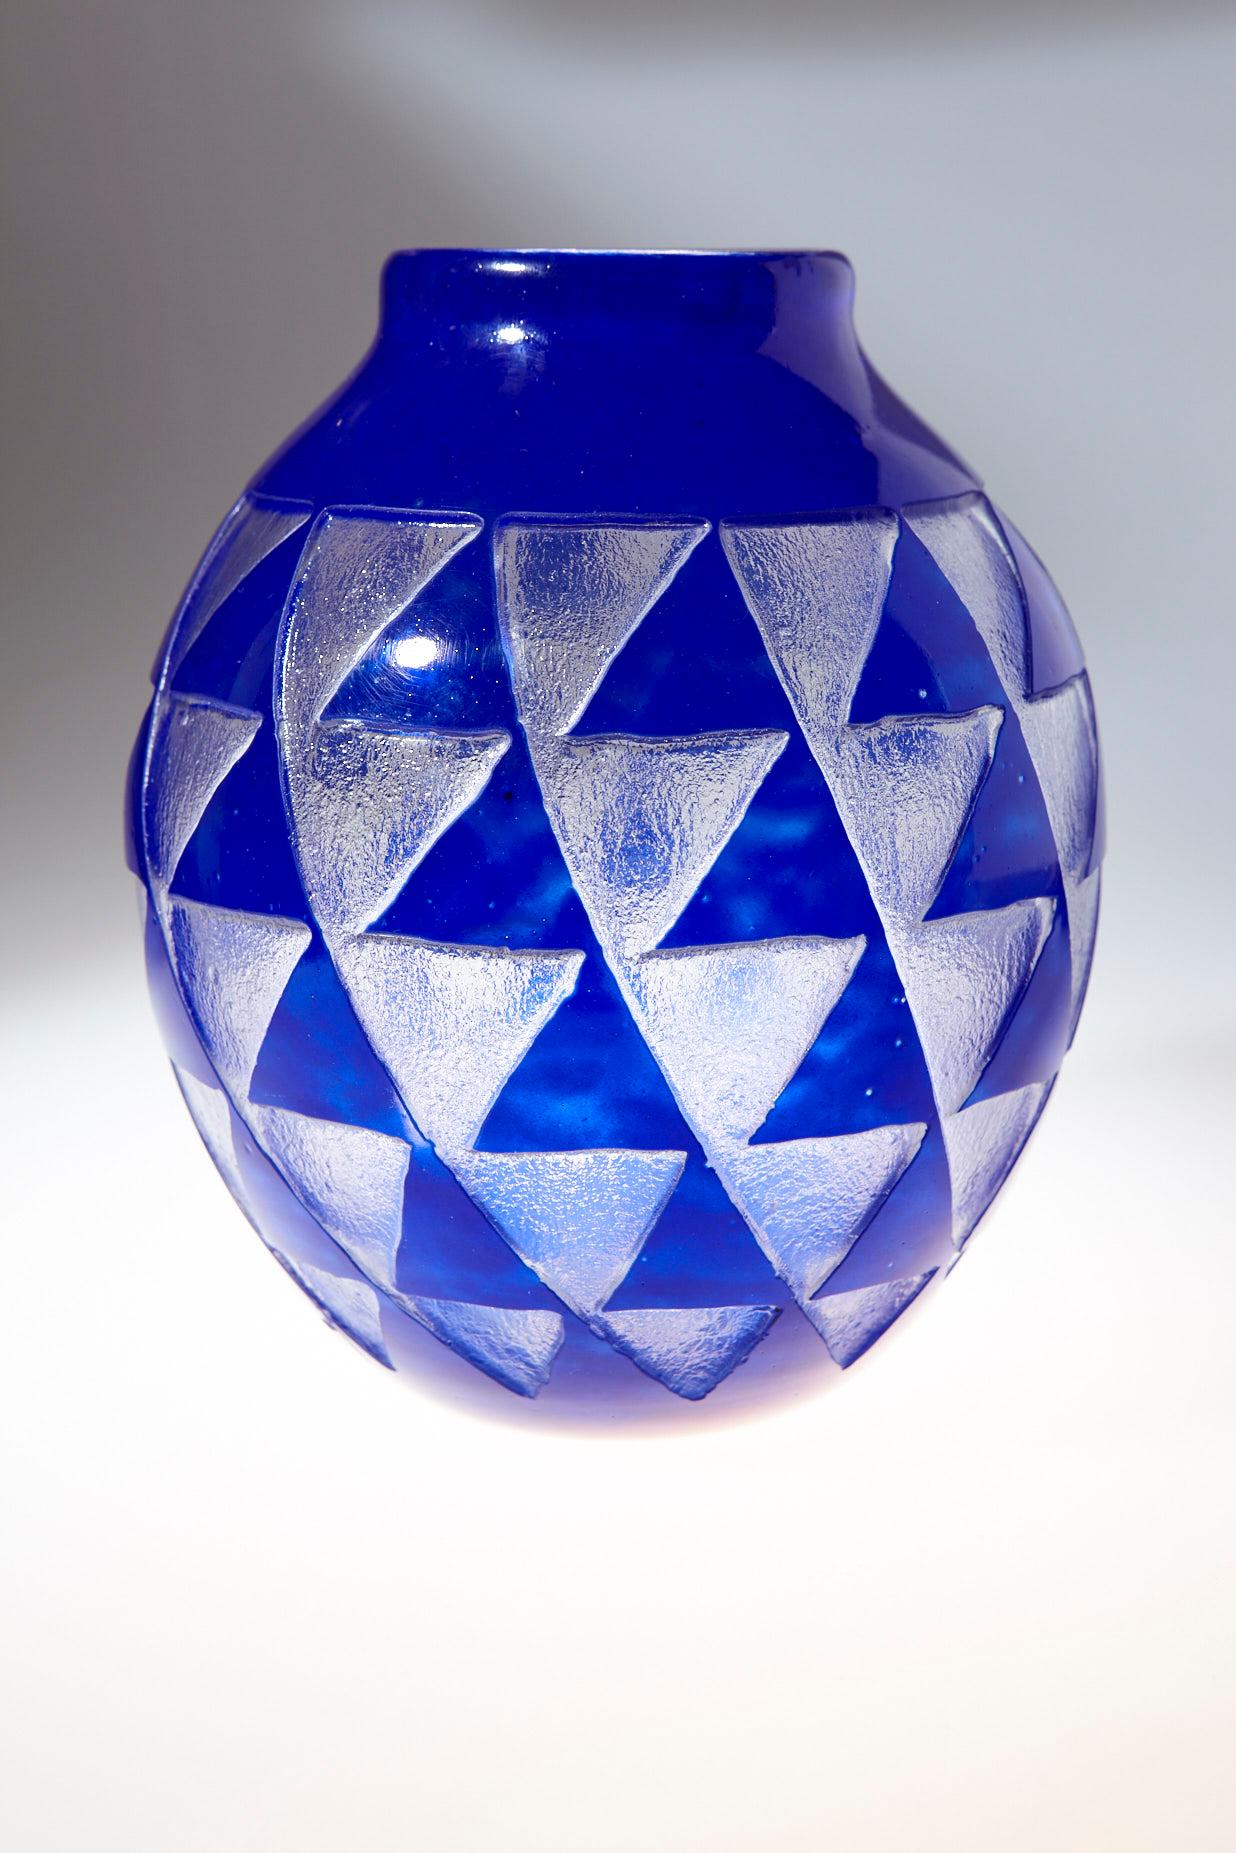 Beautiful French Art Deco glass vase by David Gueron (1892 - 1950) (Degué) for Verrerie d'Art Degué in Paris. 
The vase is made in a stunning cobalt blue cameo sandblasted glass featuring a geometric pattern of triangles. Degué used a sandblasting